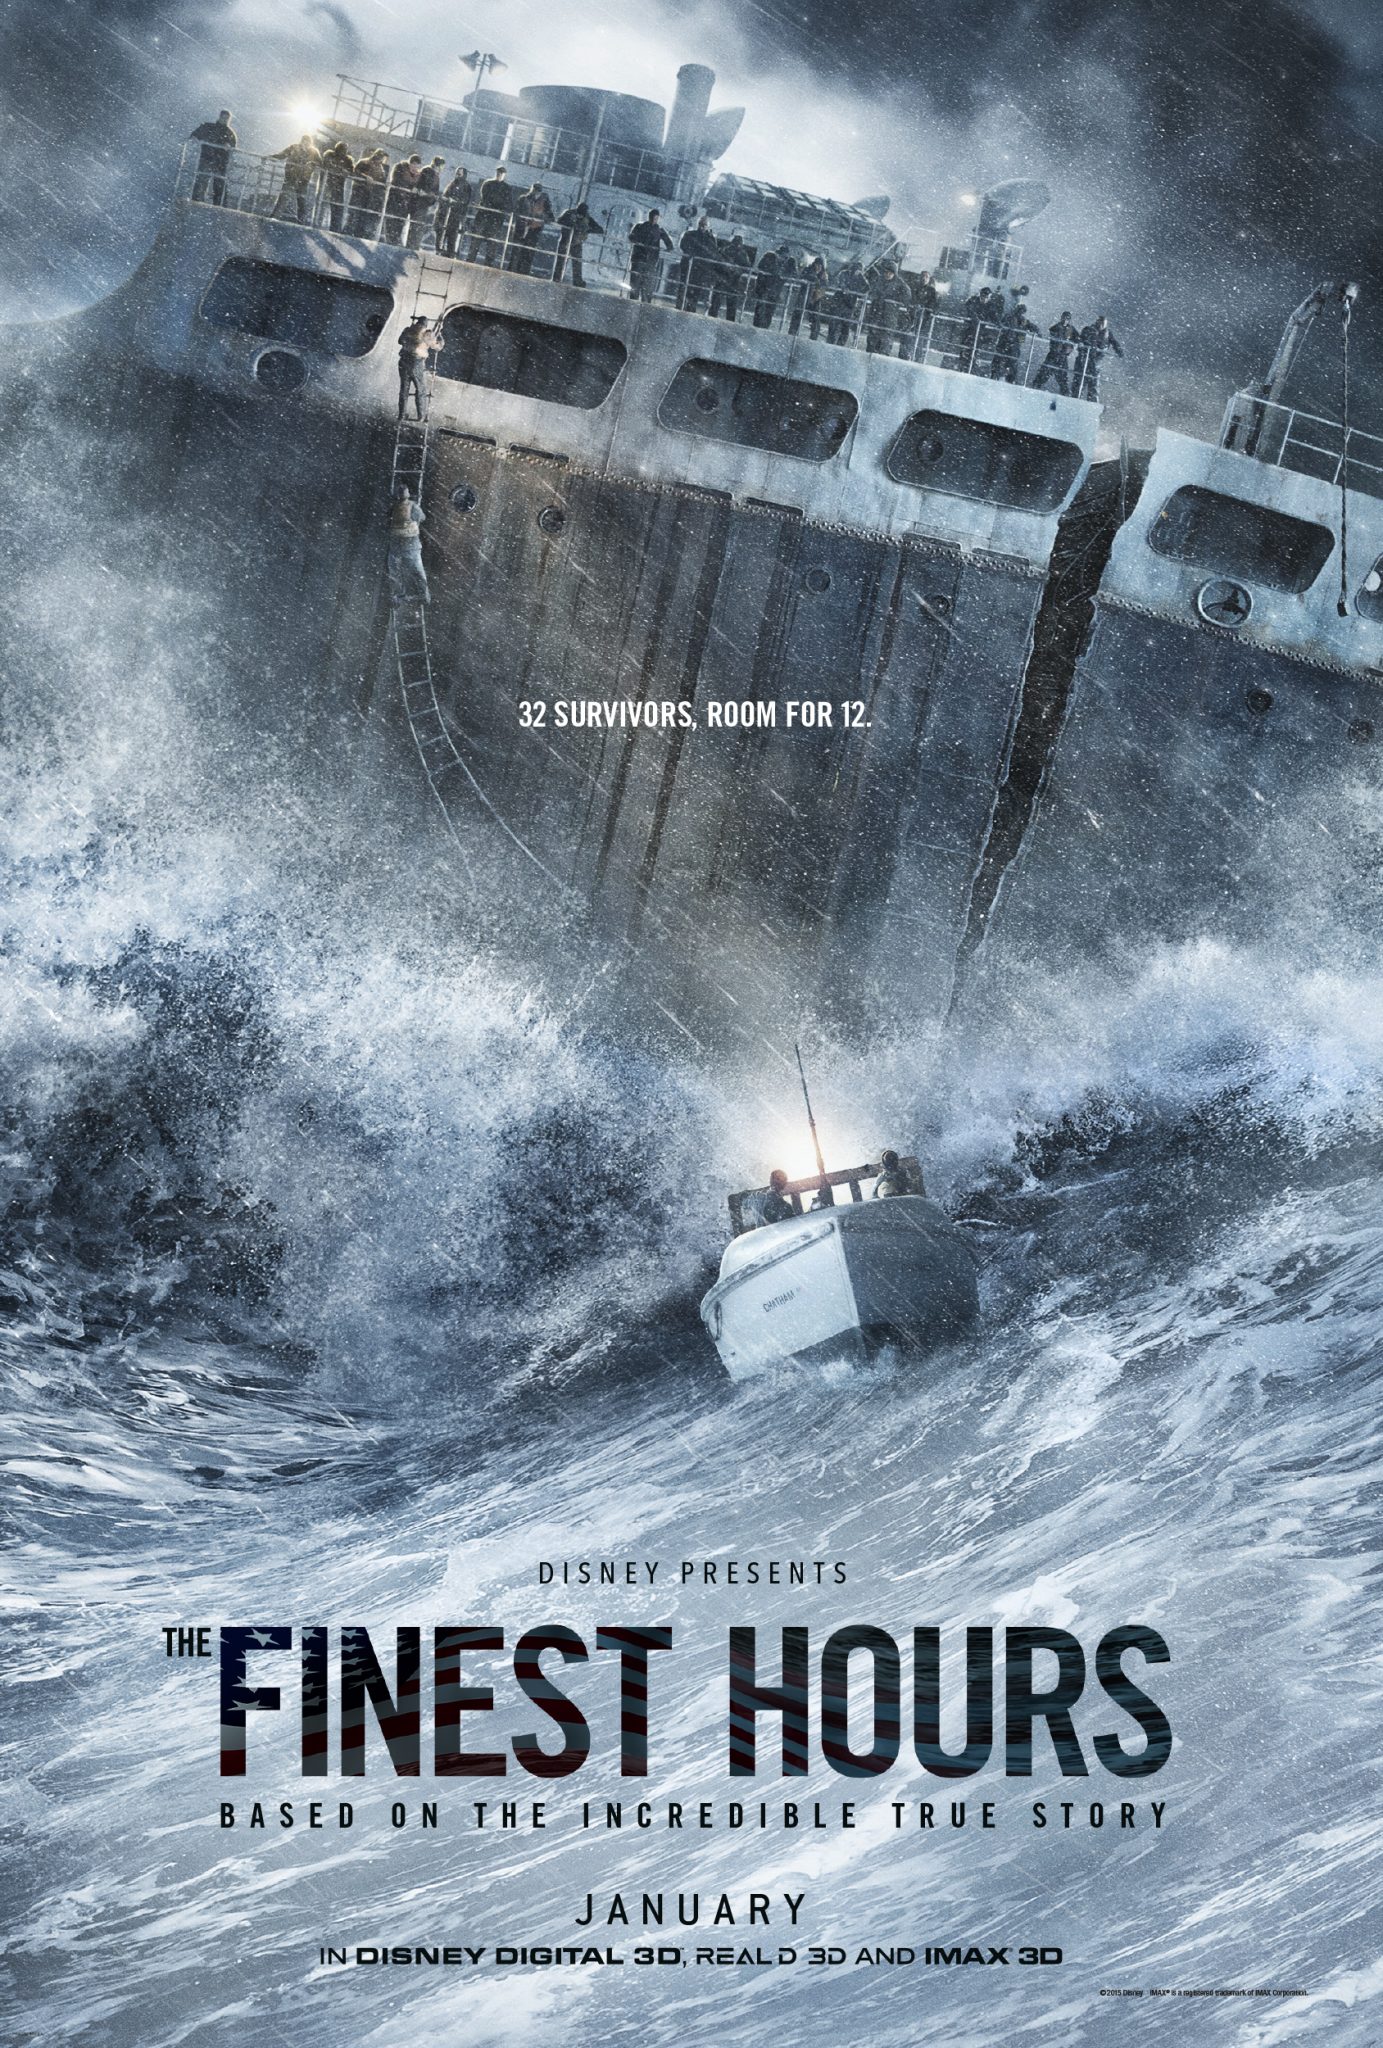 First Official Trailer of Disney’s “The Finest Hours”